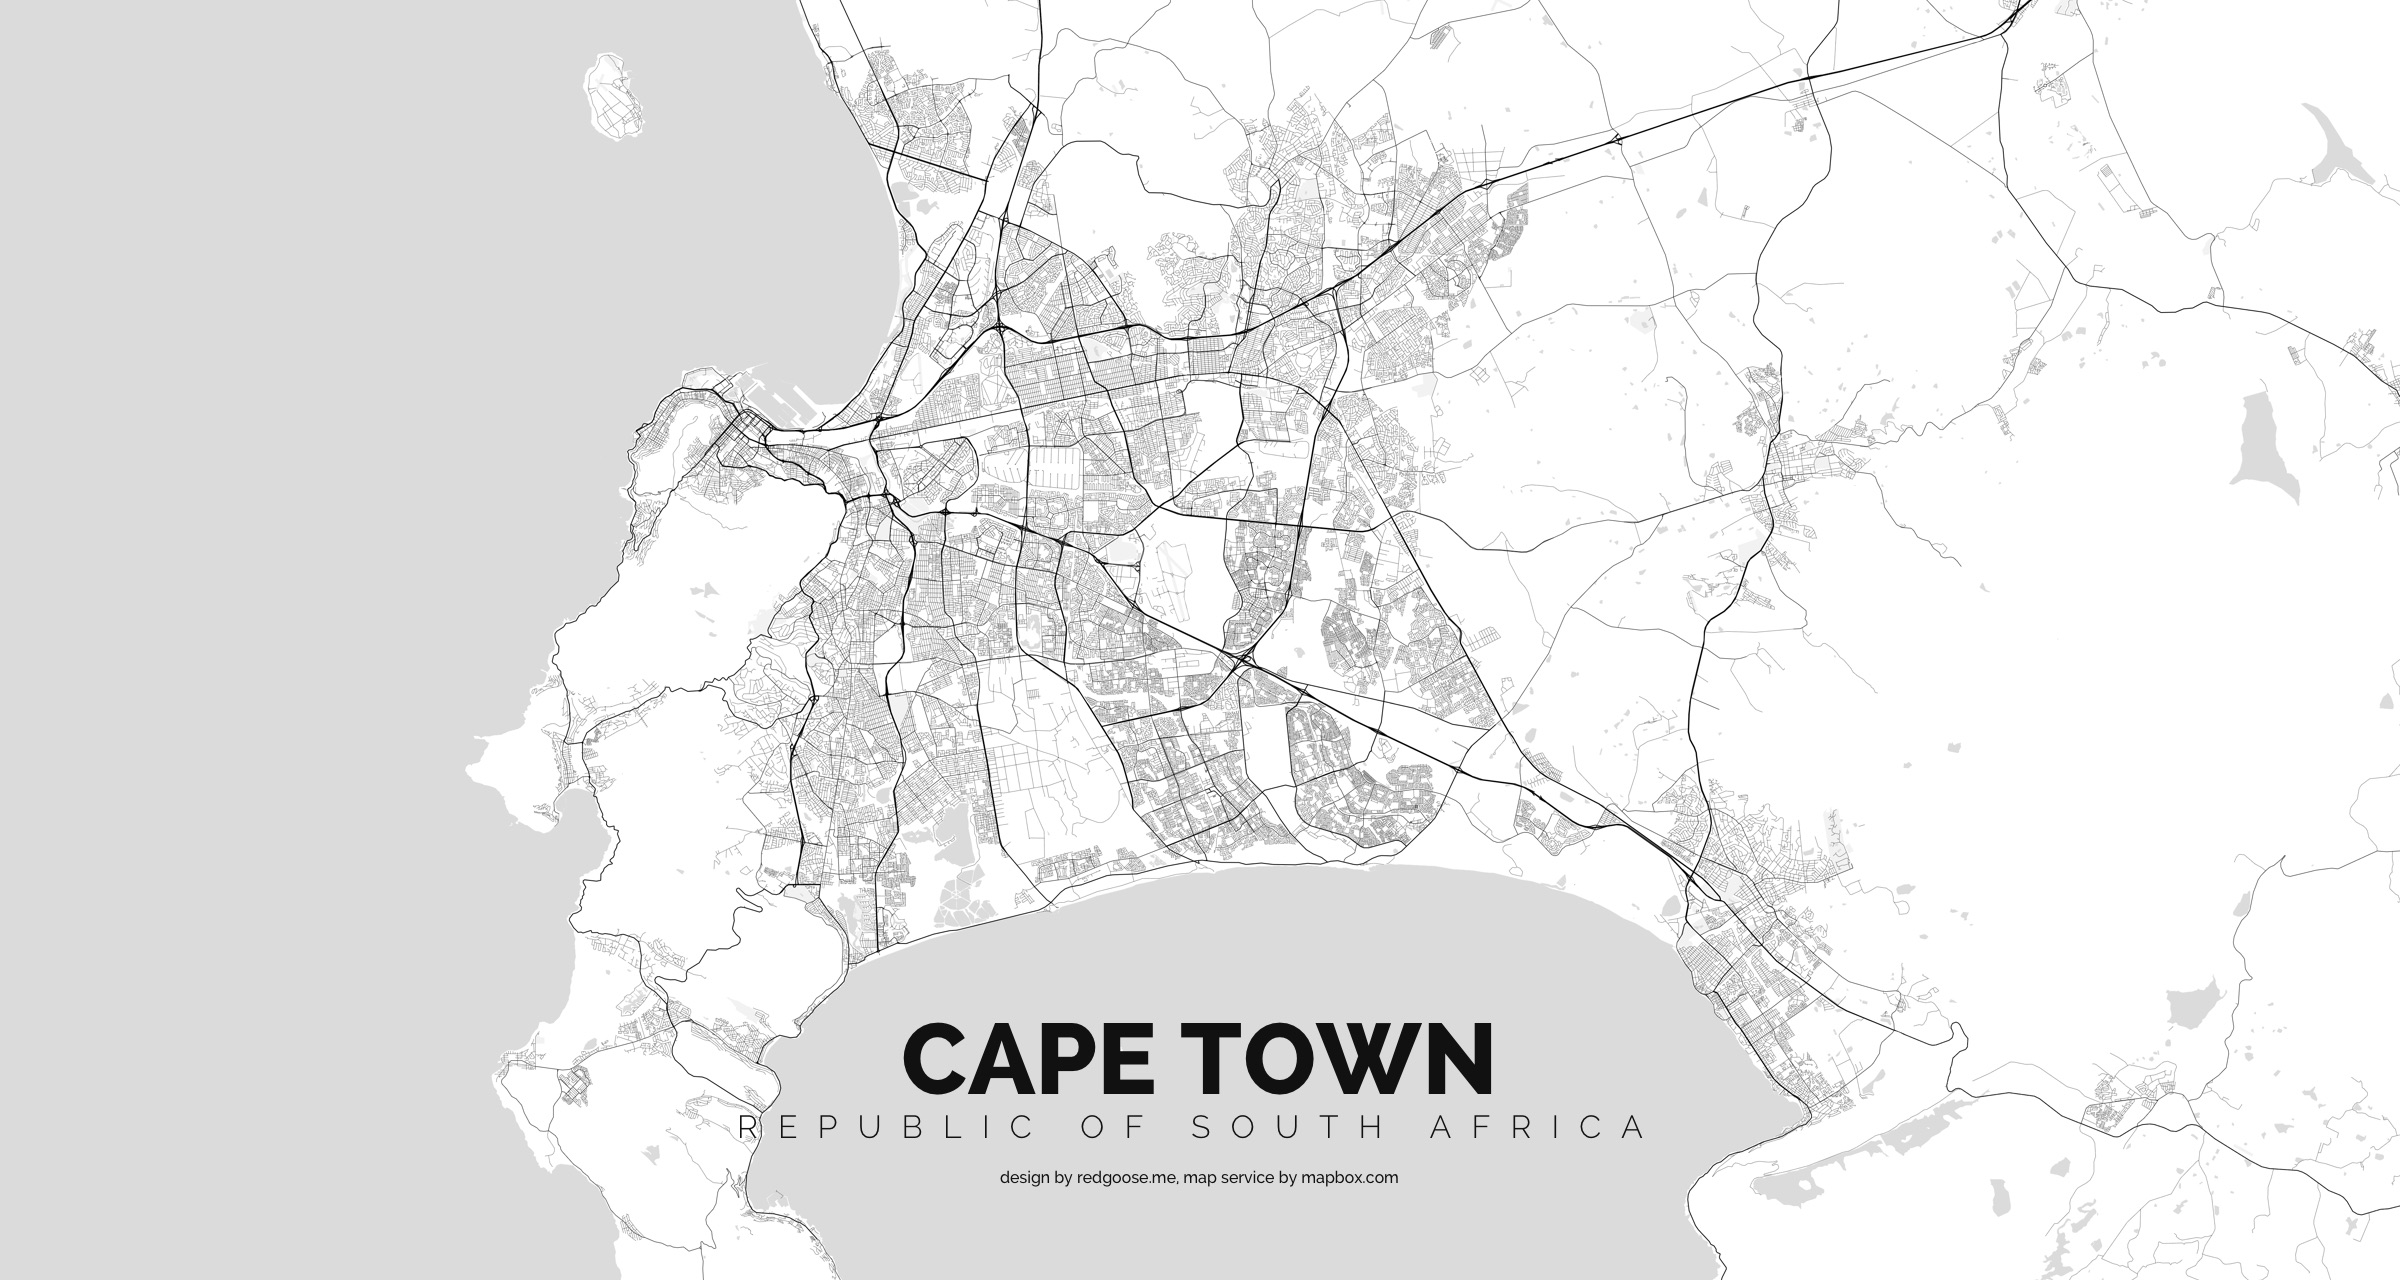 Republic_of_South_Africa_-_Cape_town.jpg